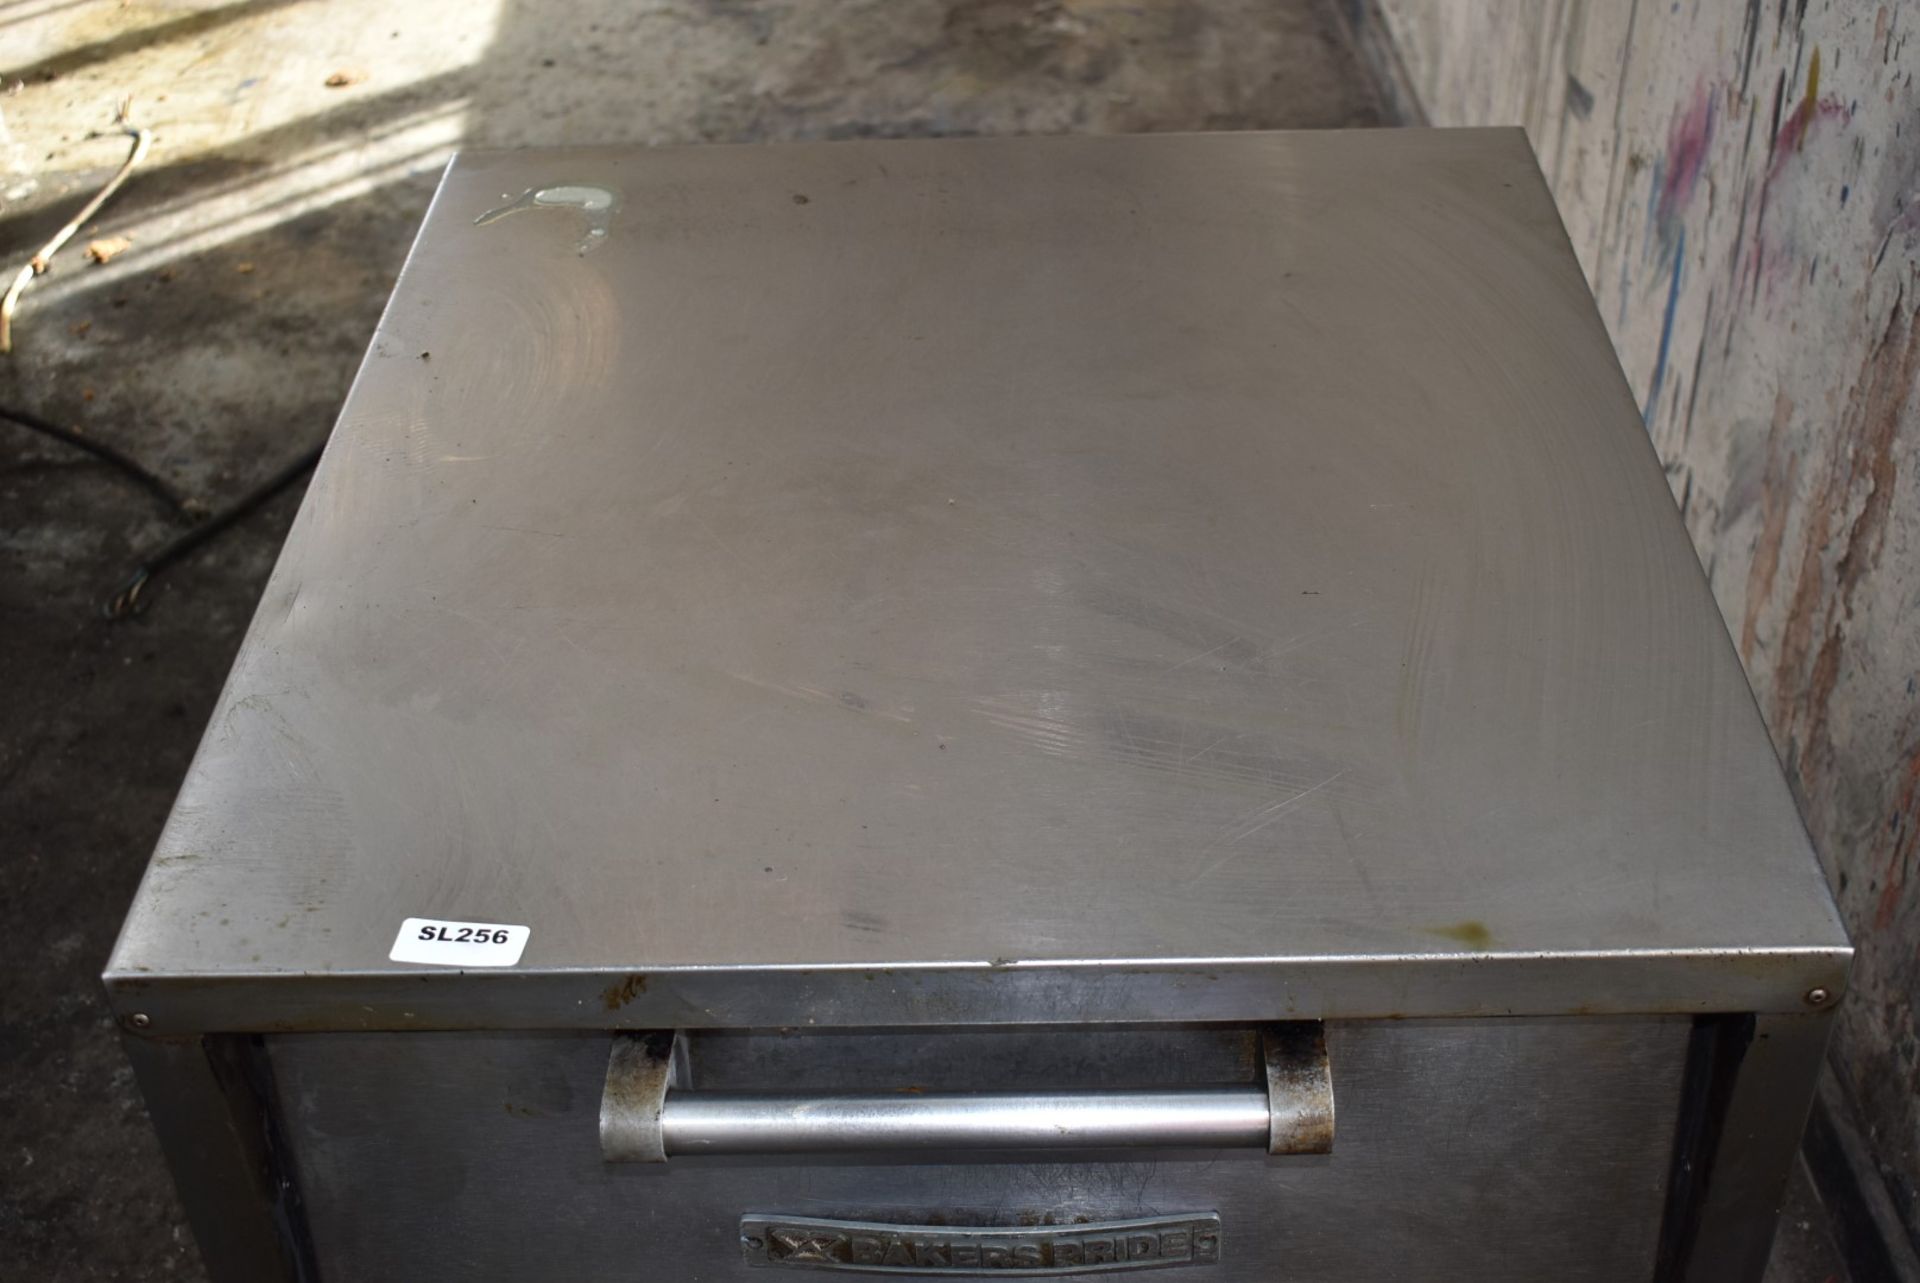 1 x Bakers Pride Commercial Twin Deck Pizza Oven - Recently Removed from a Restaurant - Image 8 of 9